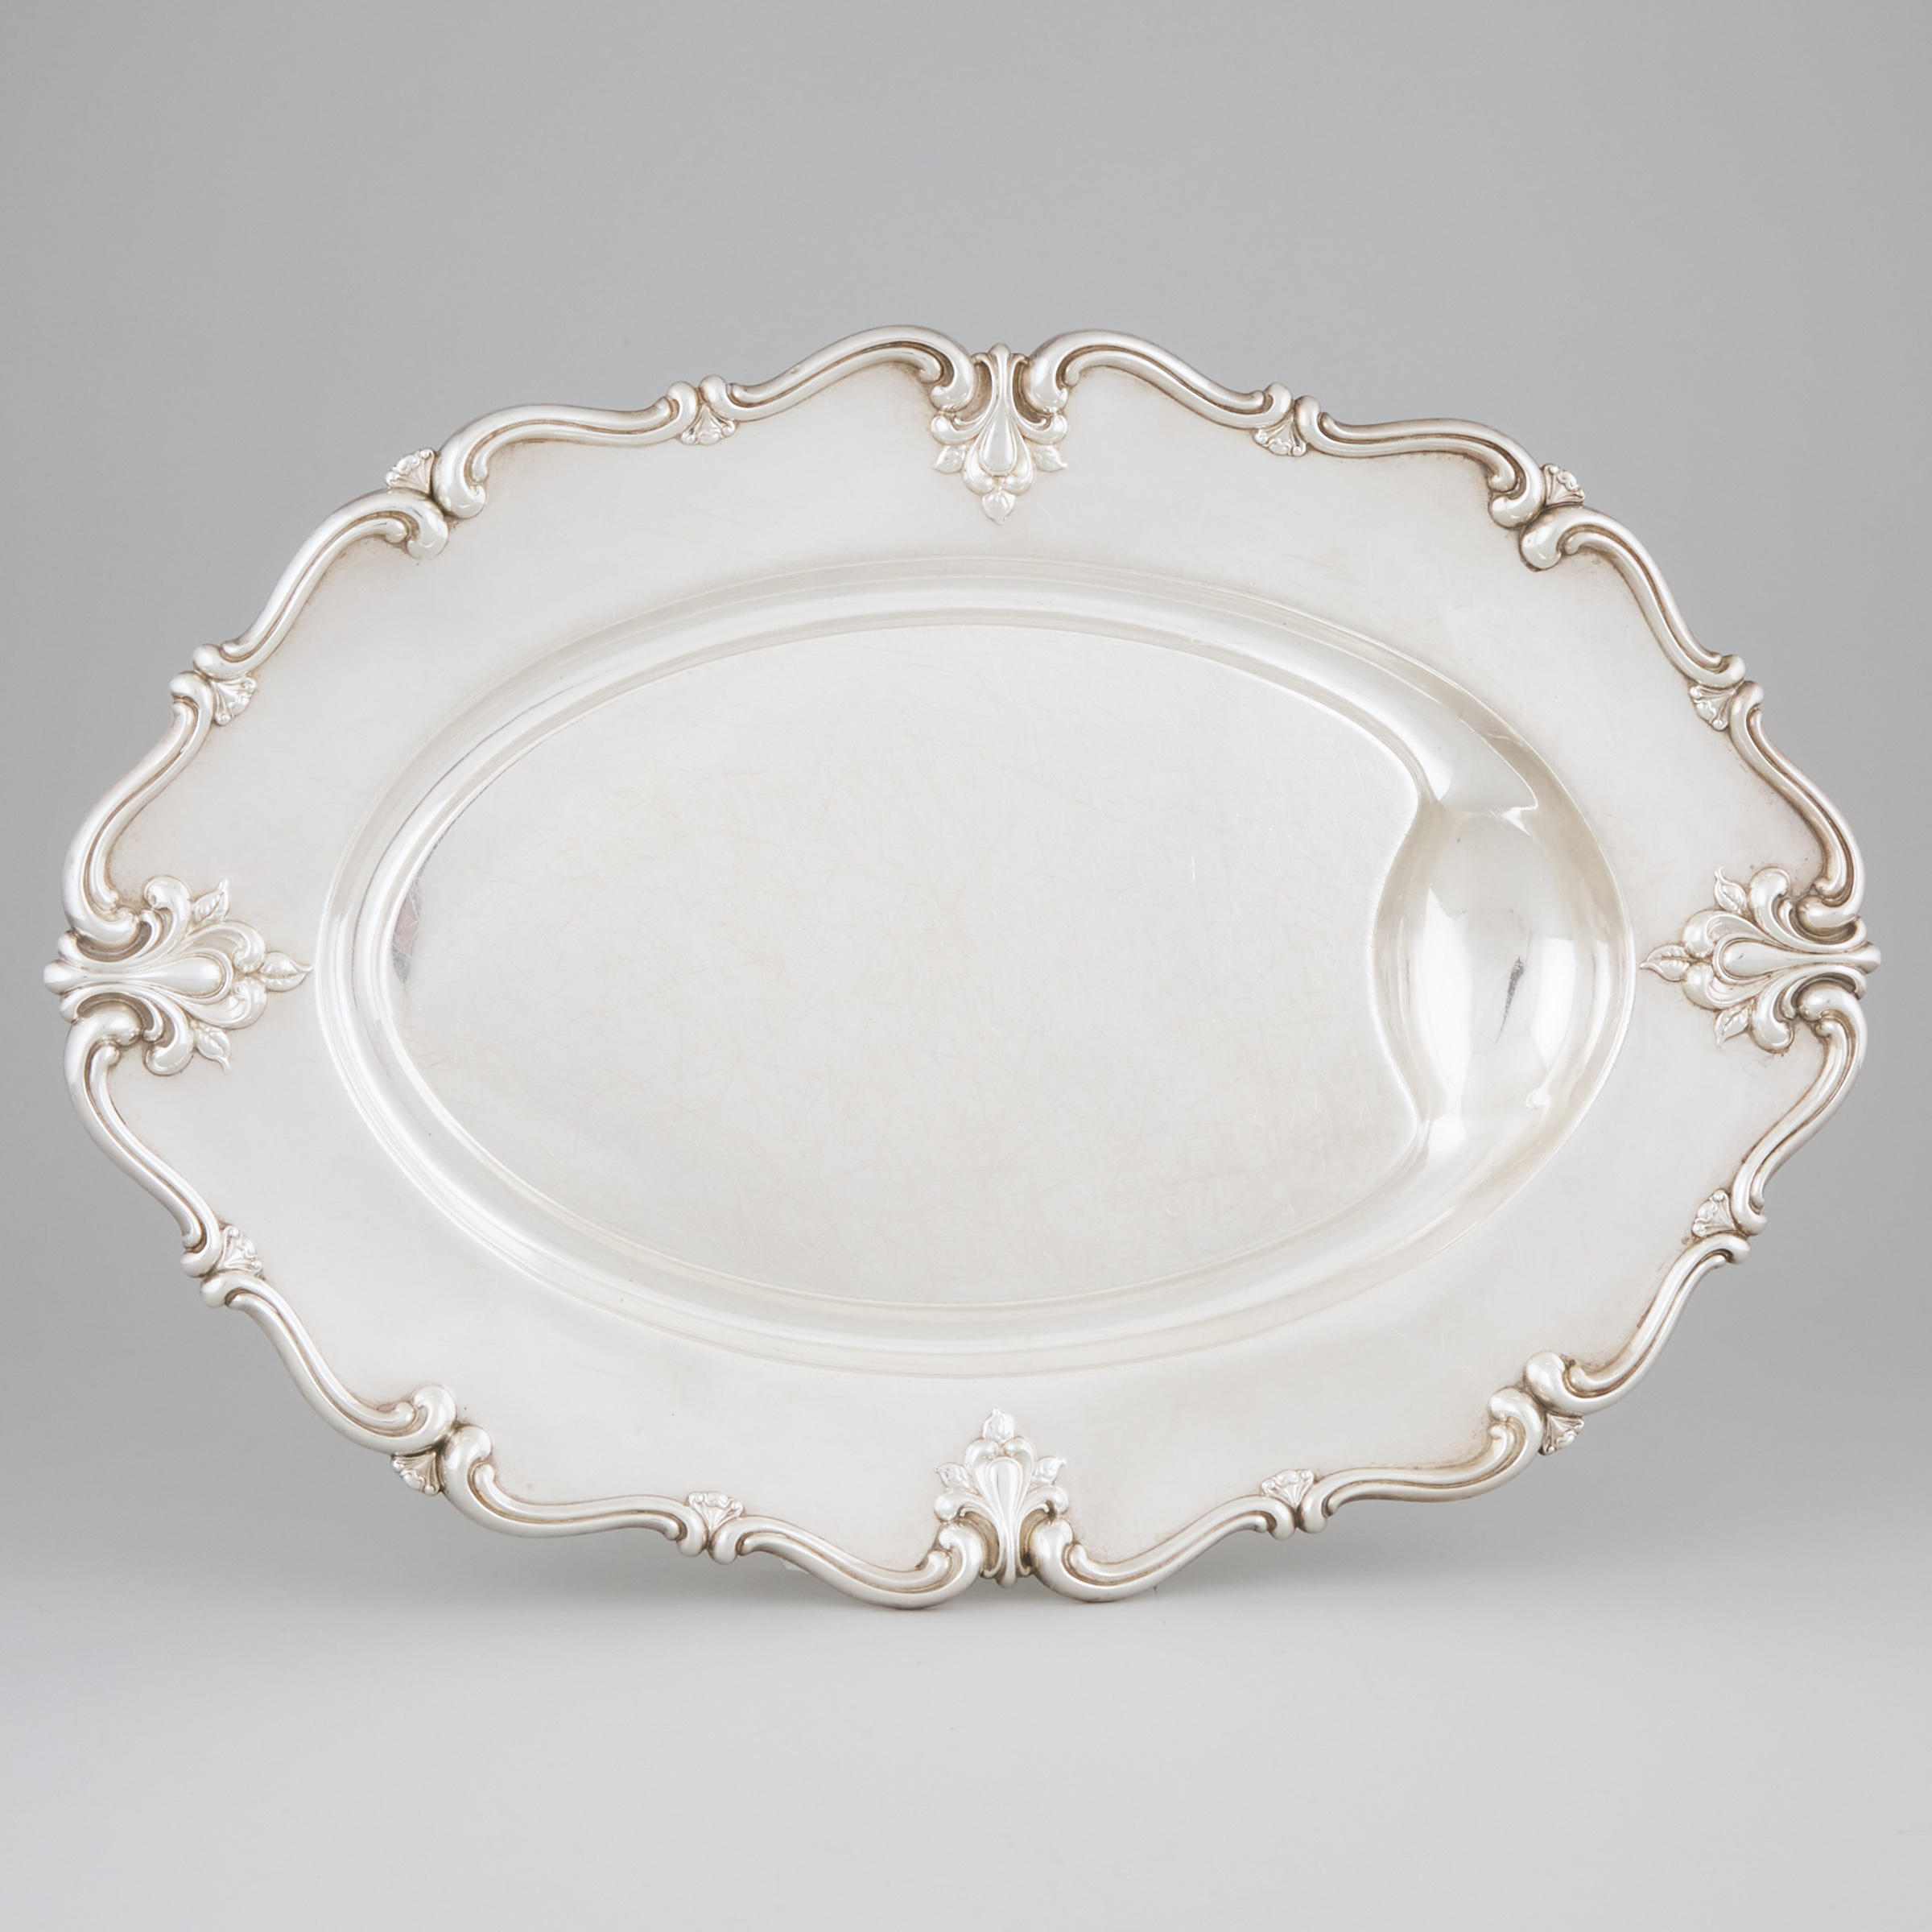 American Silver Oval Meat Platter, Frank M. Whiting & Co., North Attleboro, Mass., 20th century